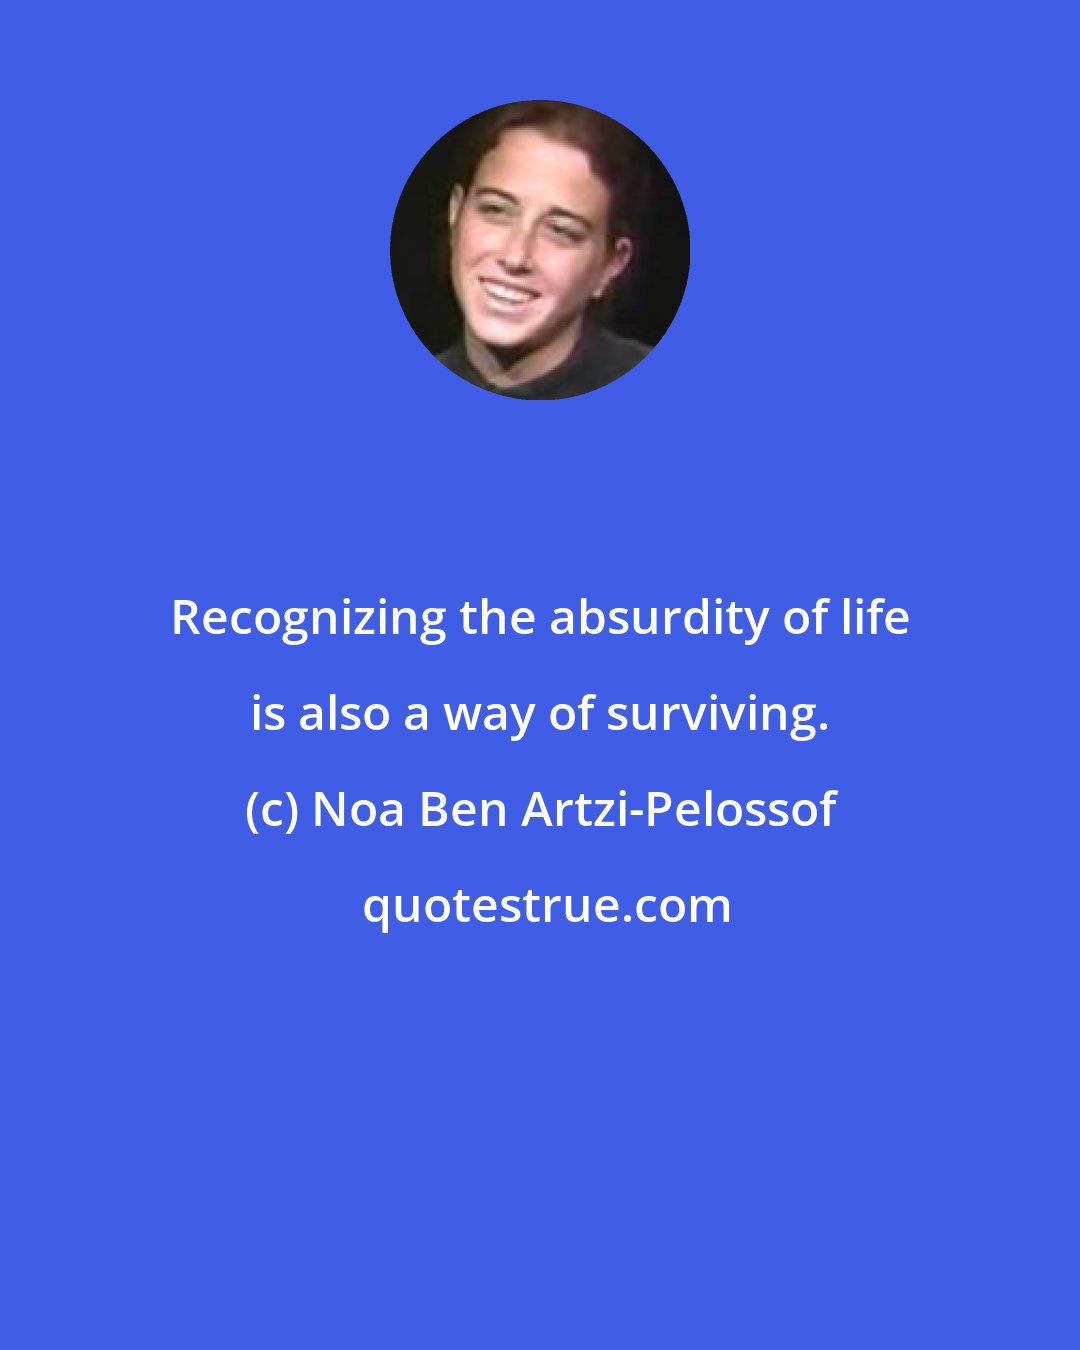 Noa Ben Artzi-Pelossof: Recognizing the absurdity of life is also a way of surviving.